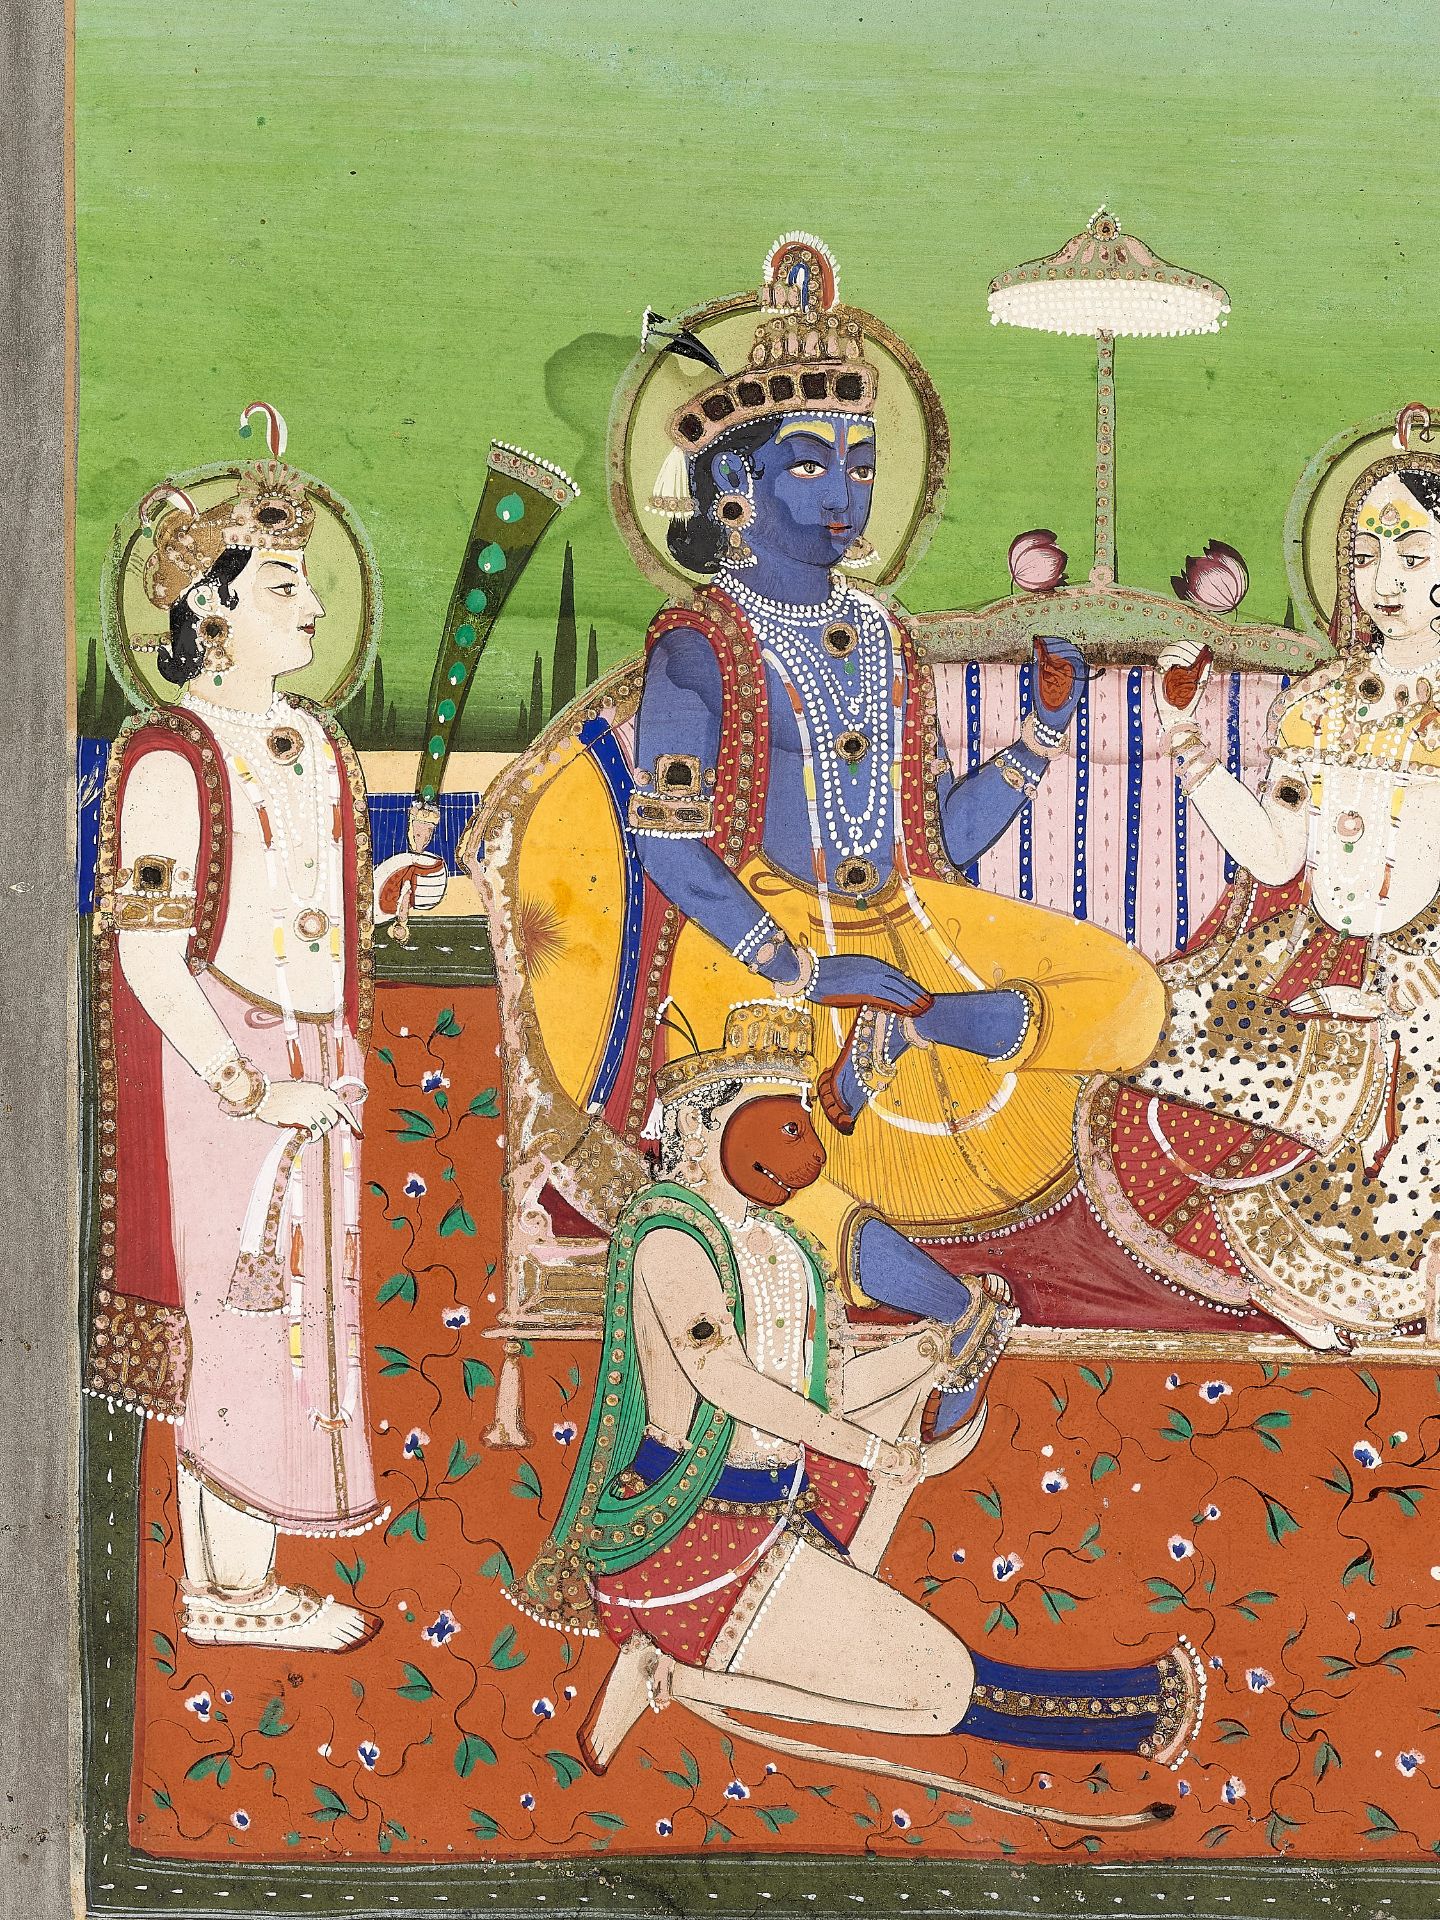 AN INDIAN MINIATURE PAINTING OF RAMA AND SITA ENTHRONED - Image 2 of 9